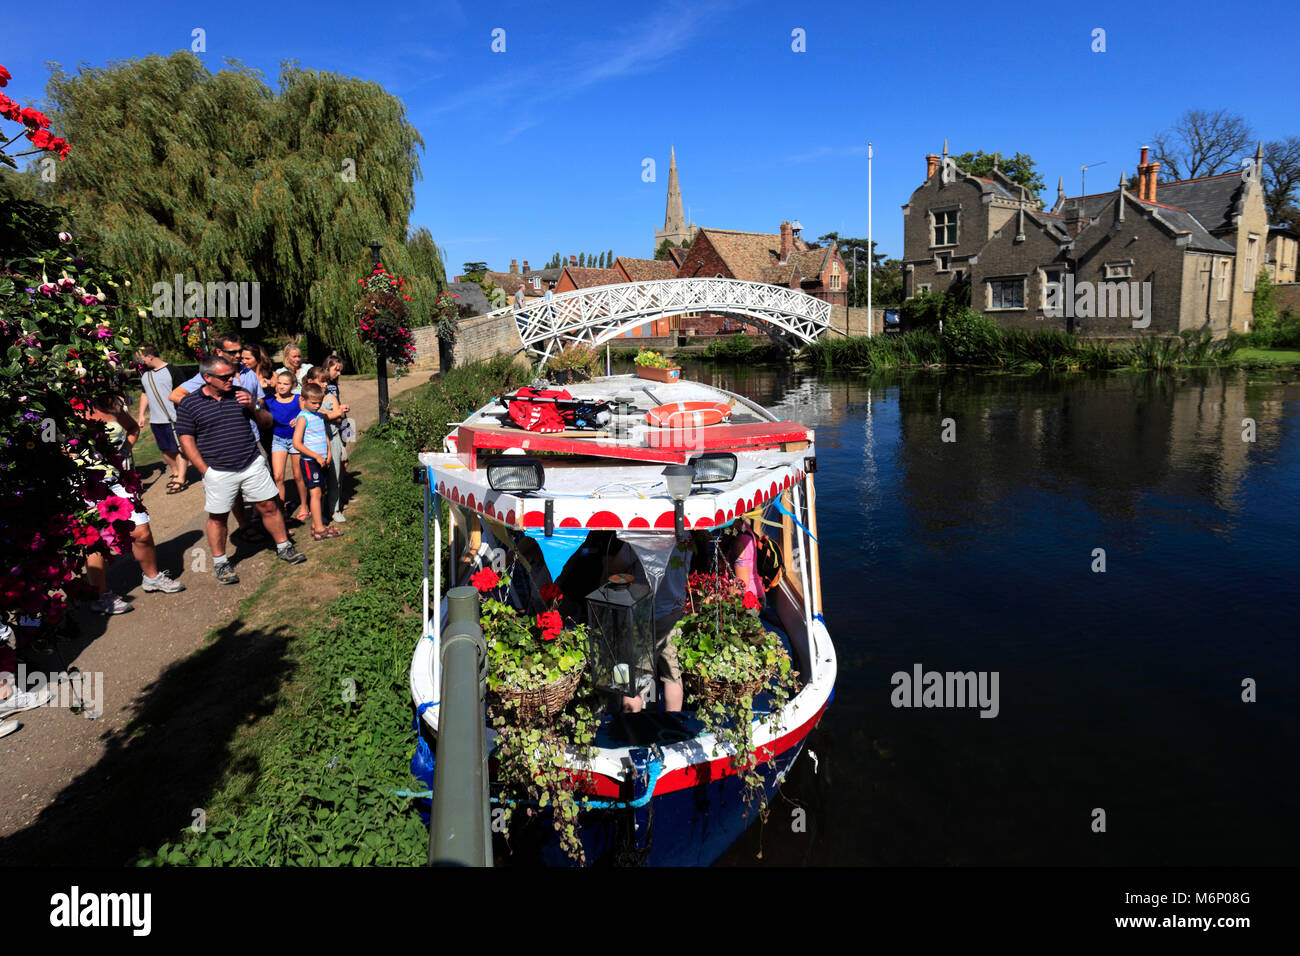 Boats on the river Great Ouse, Godmanchester town, Cambridgeshire, England, UK Stock Photo